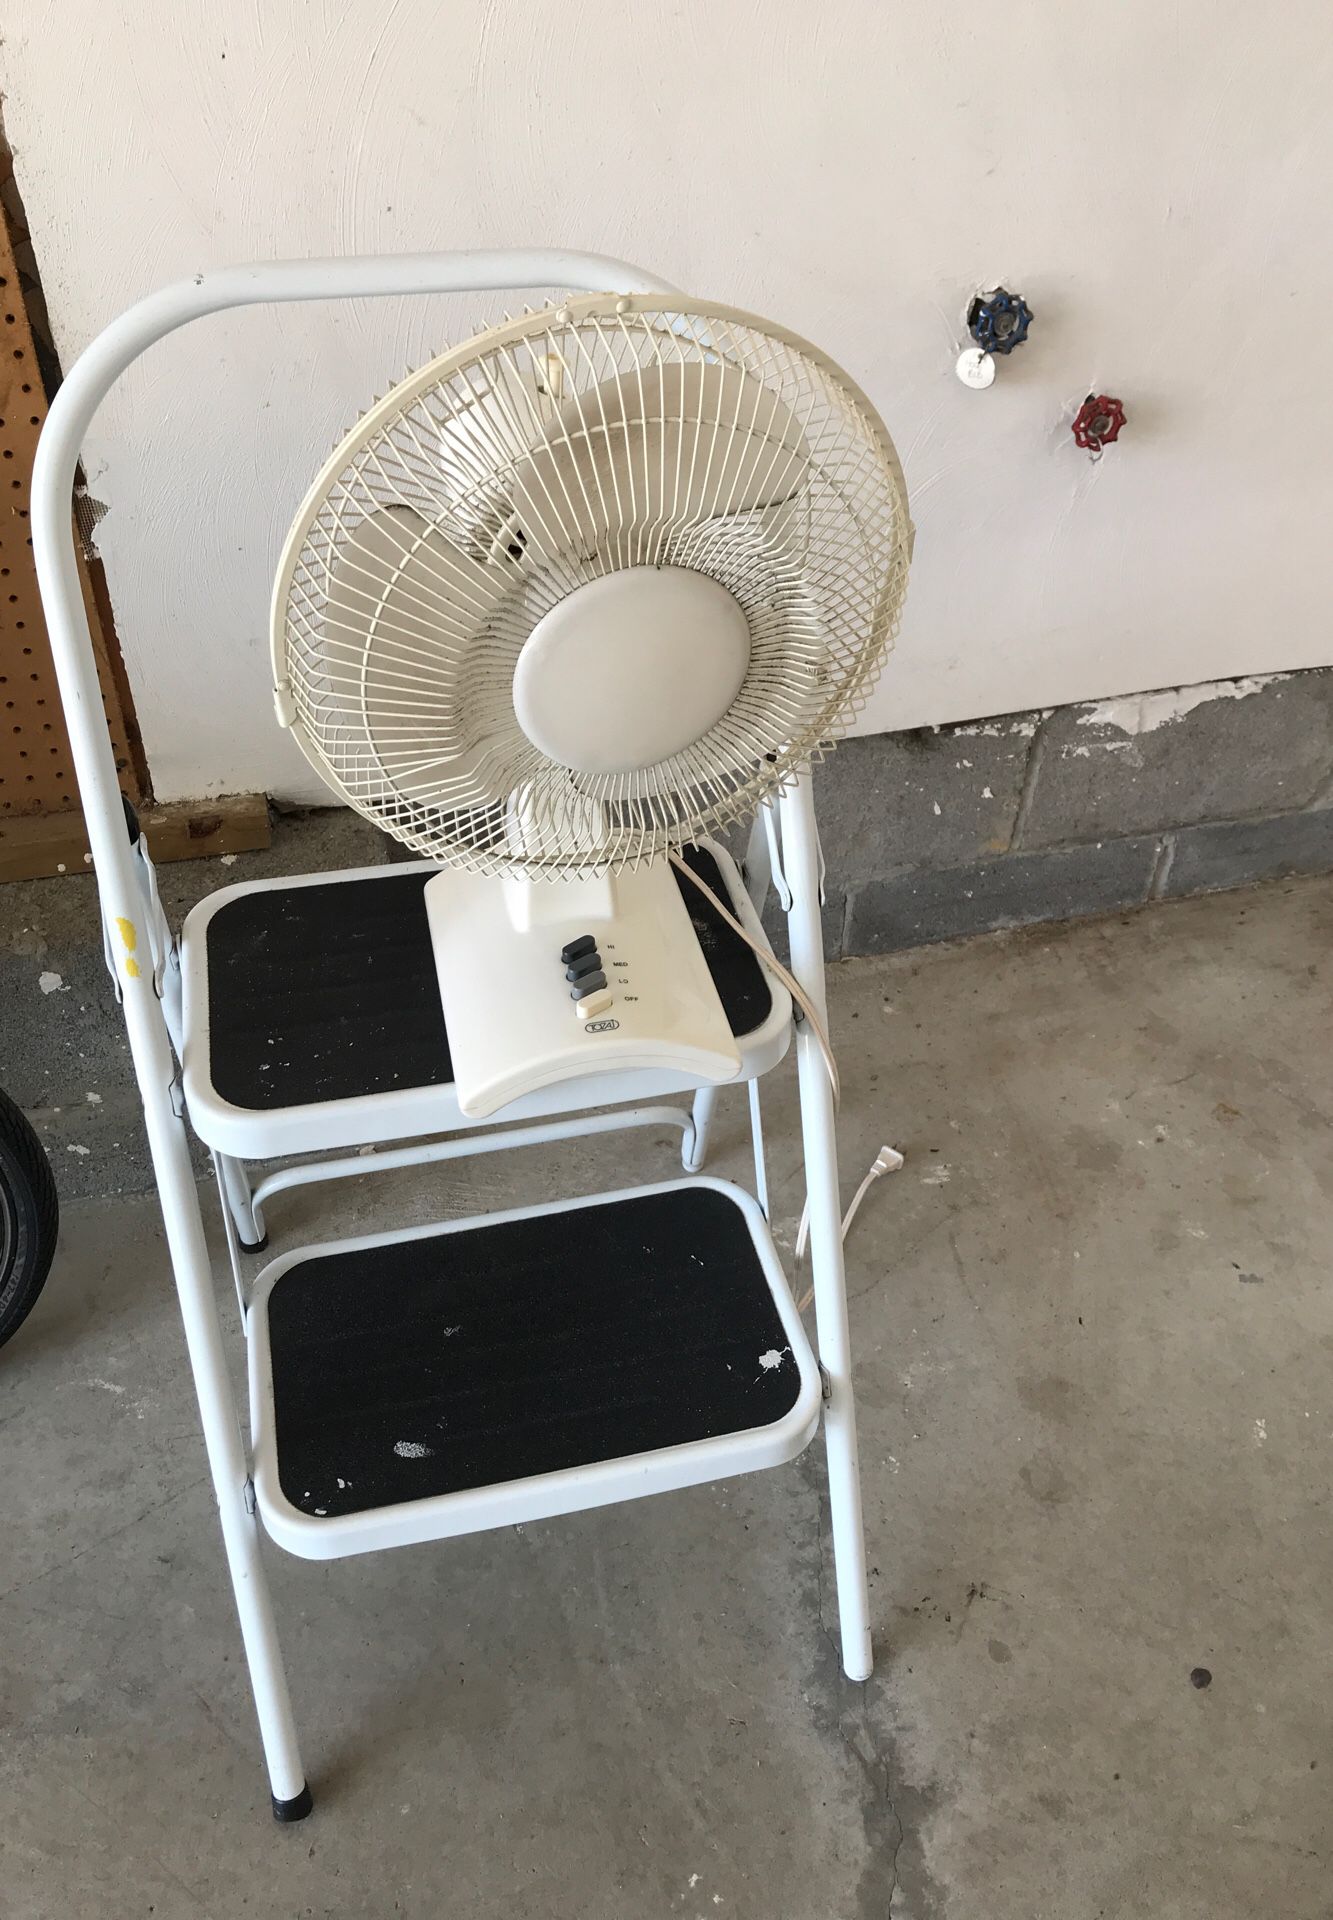 FREE items! step stool and fan